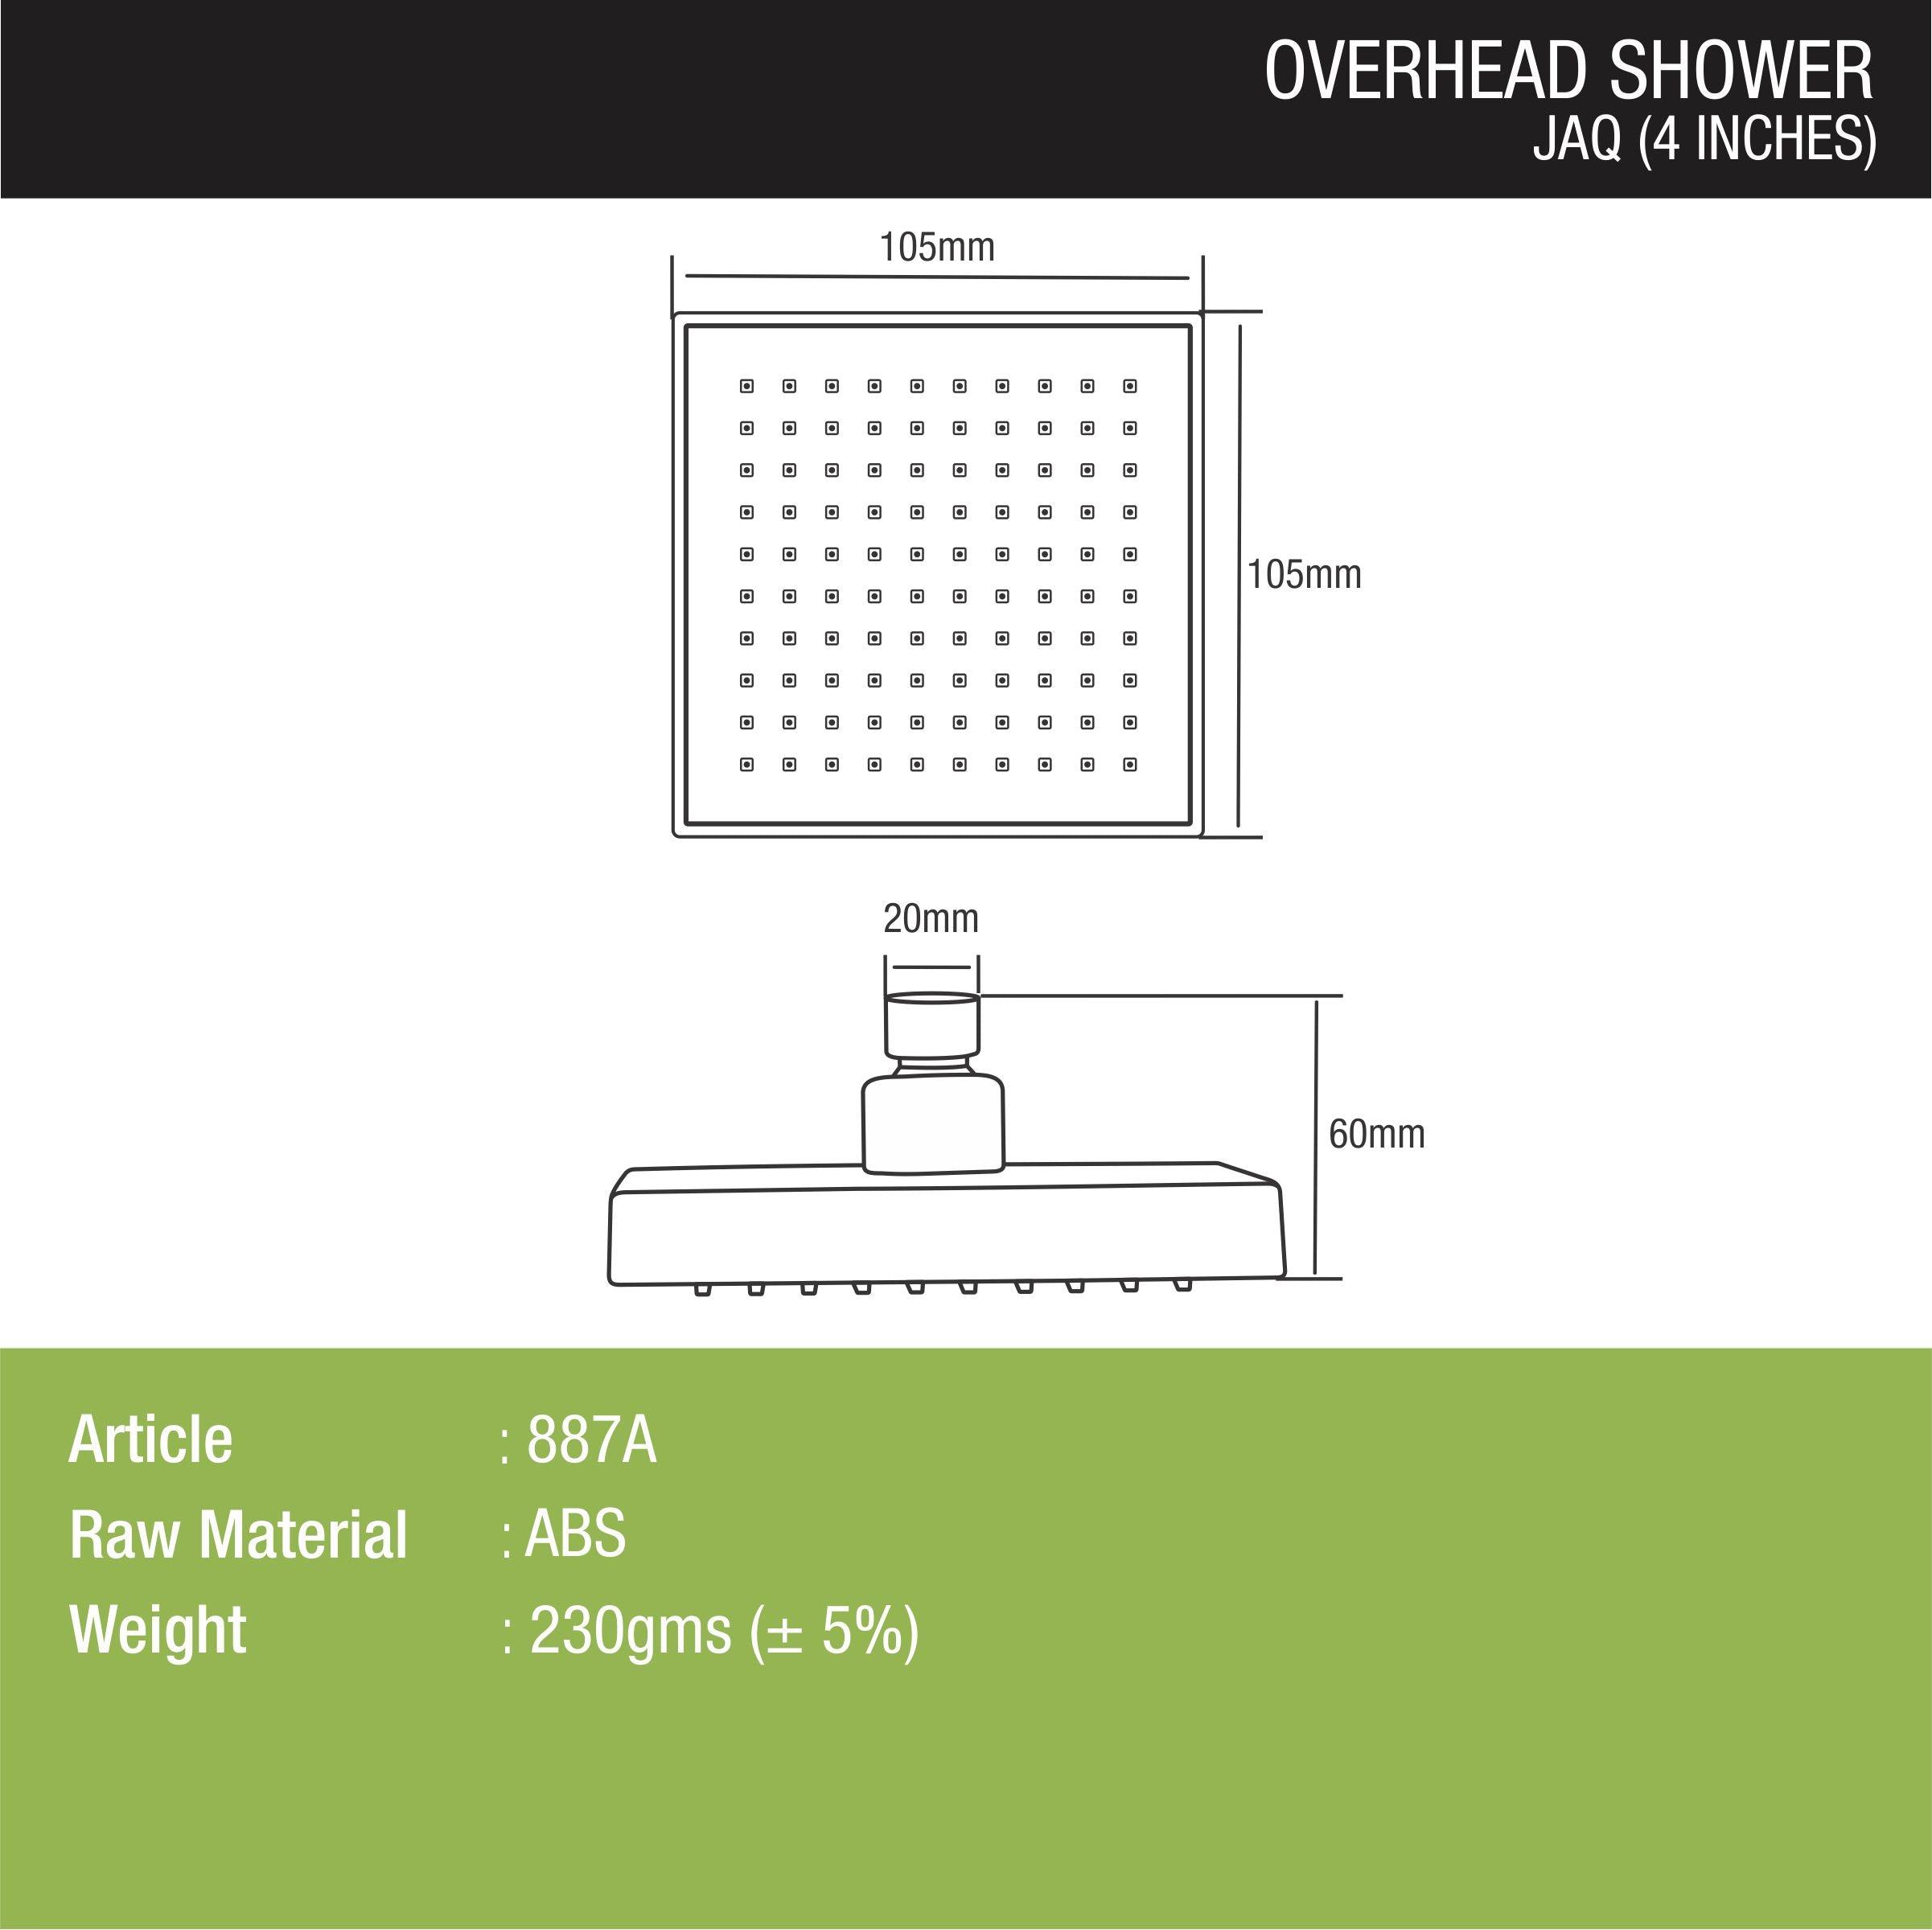 Jaq Overhead Shower (4 x 4 Inches) dimensions and sizes